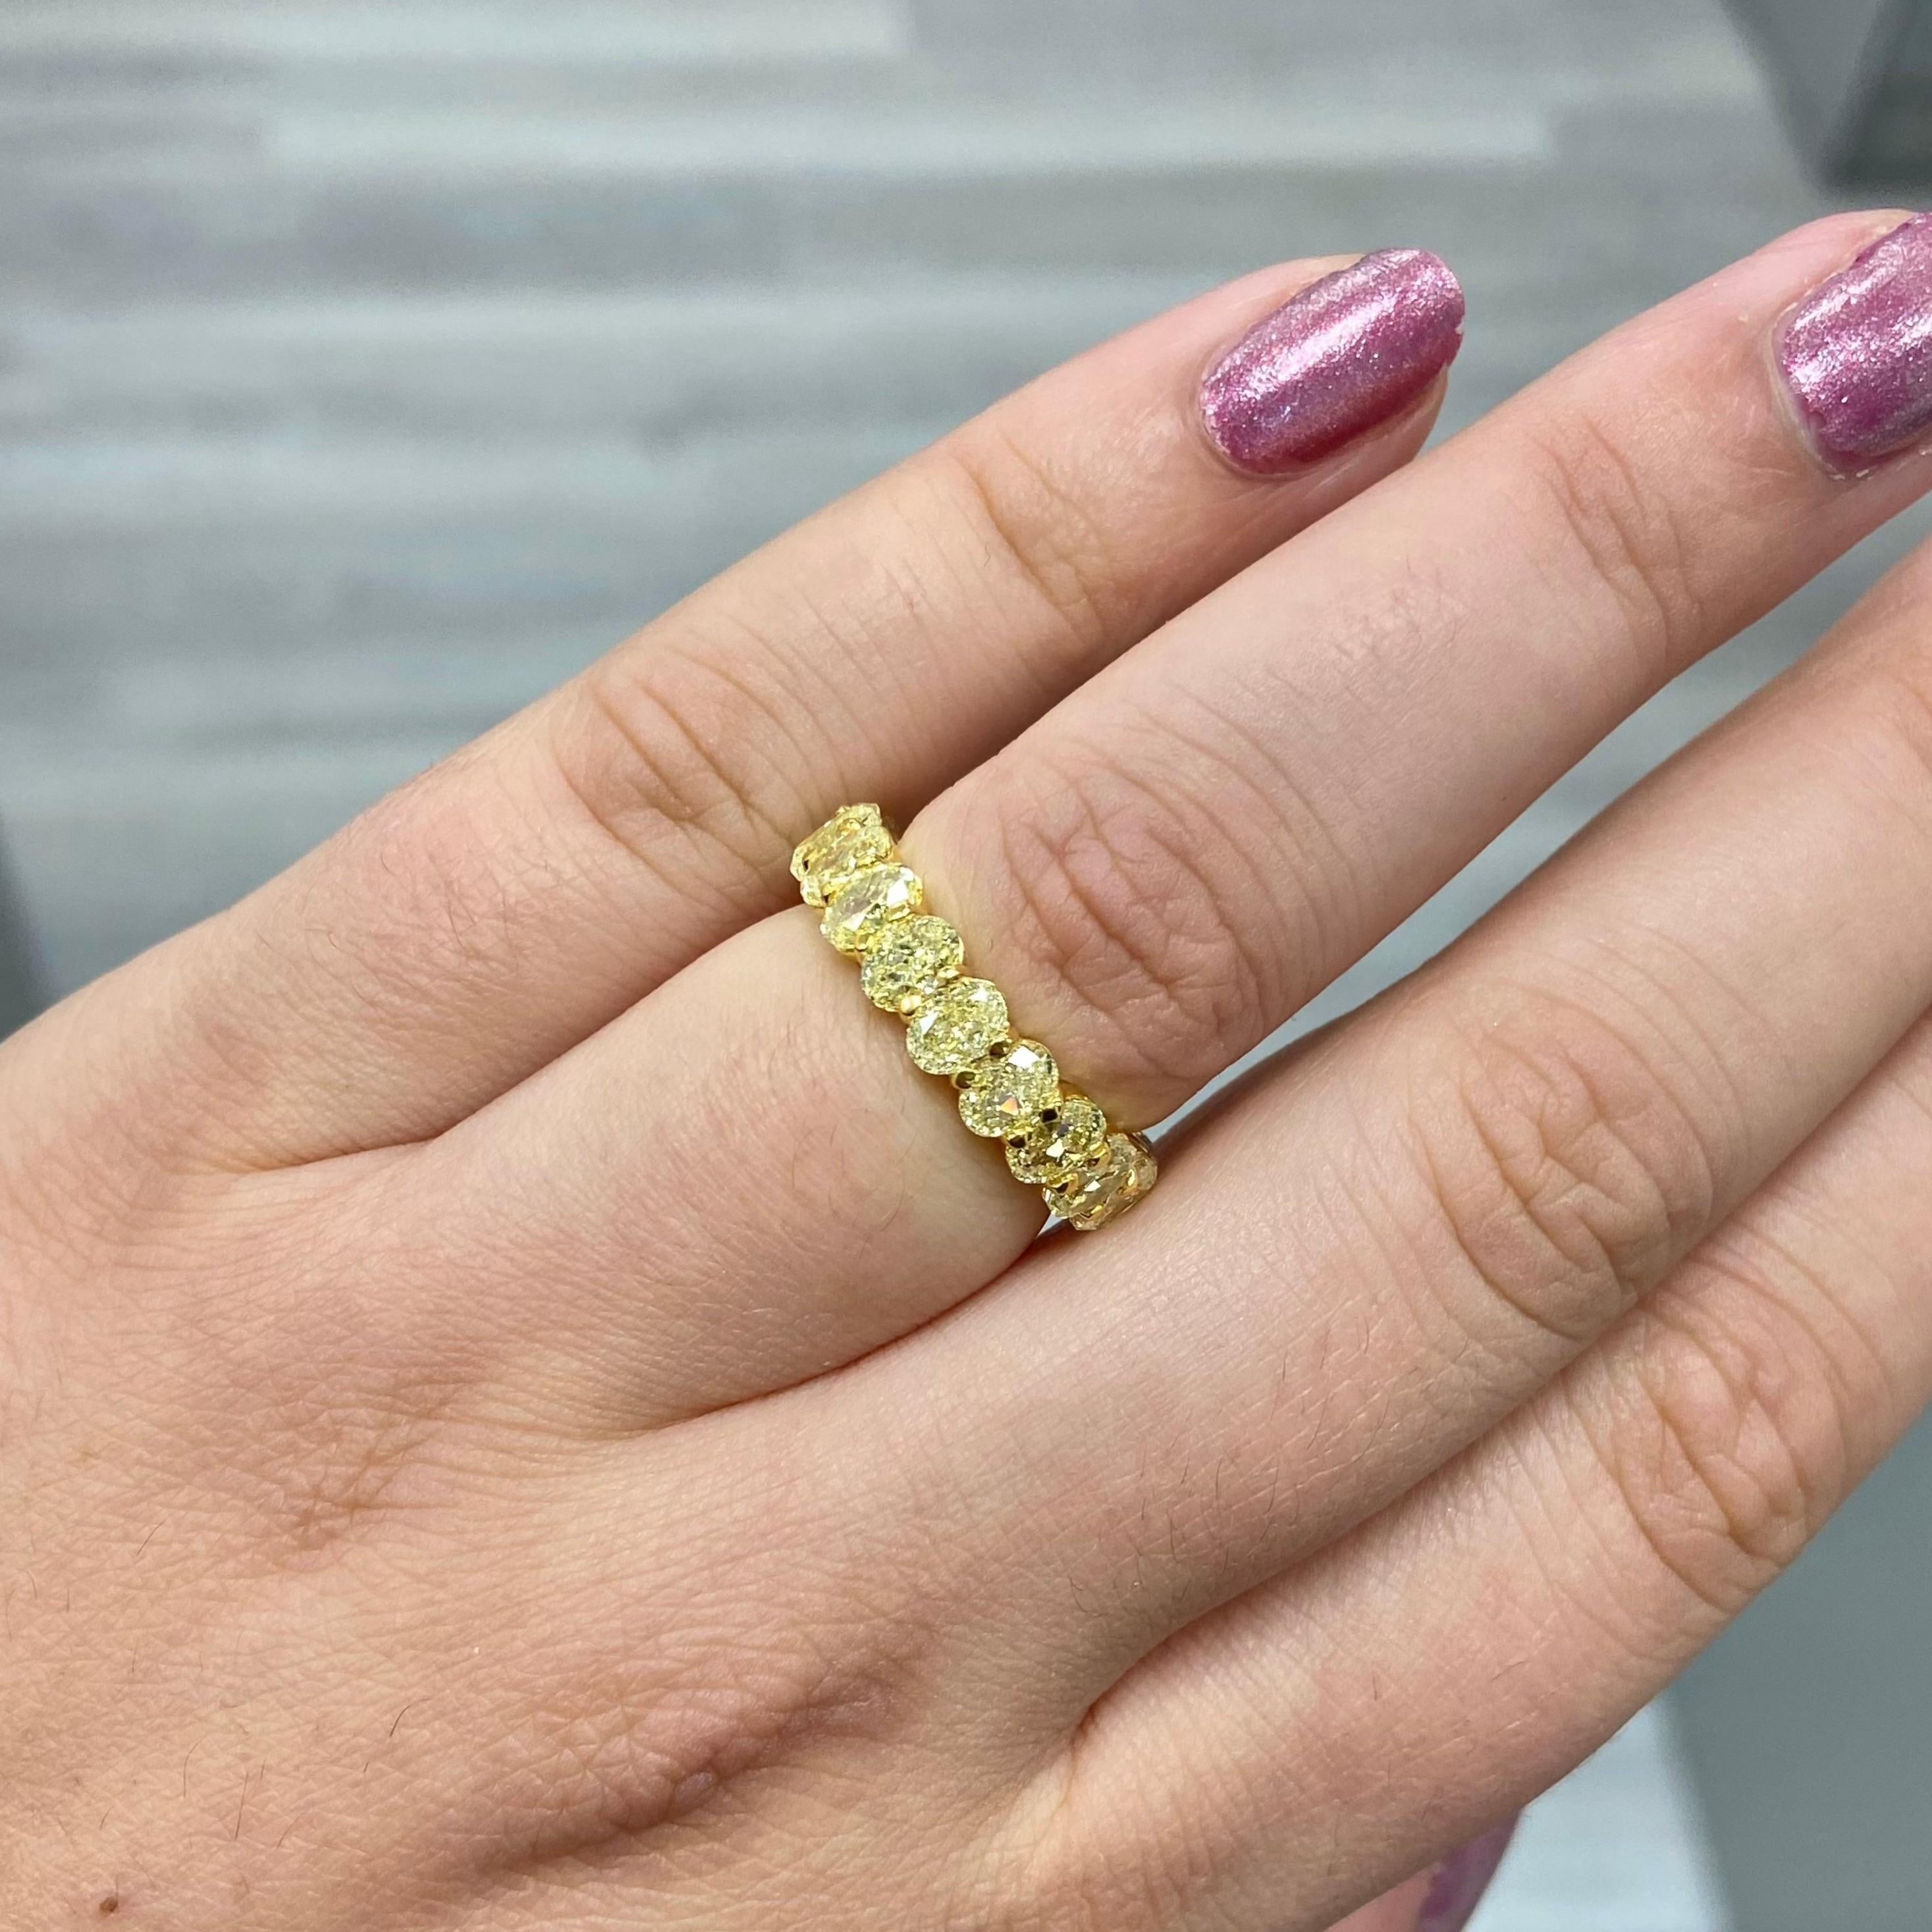 5.85 carats 
Fancy Yellow
VS-VVS Clarity 
Oval Cut Diamonds
19 diamonds
0.30 carat average weight per diamond
Size 6
Crafted in 18k Yellow Gold
Handmade in NYC

This piece can be viewed before purchase in our showroom in NYC, or at one of our retail